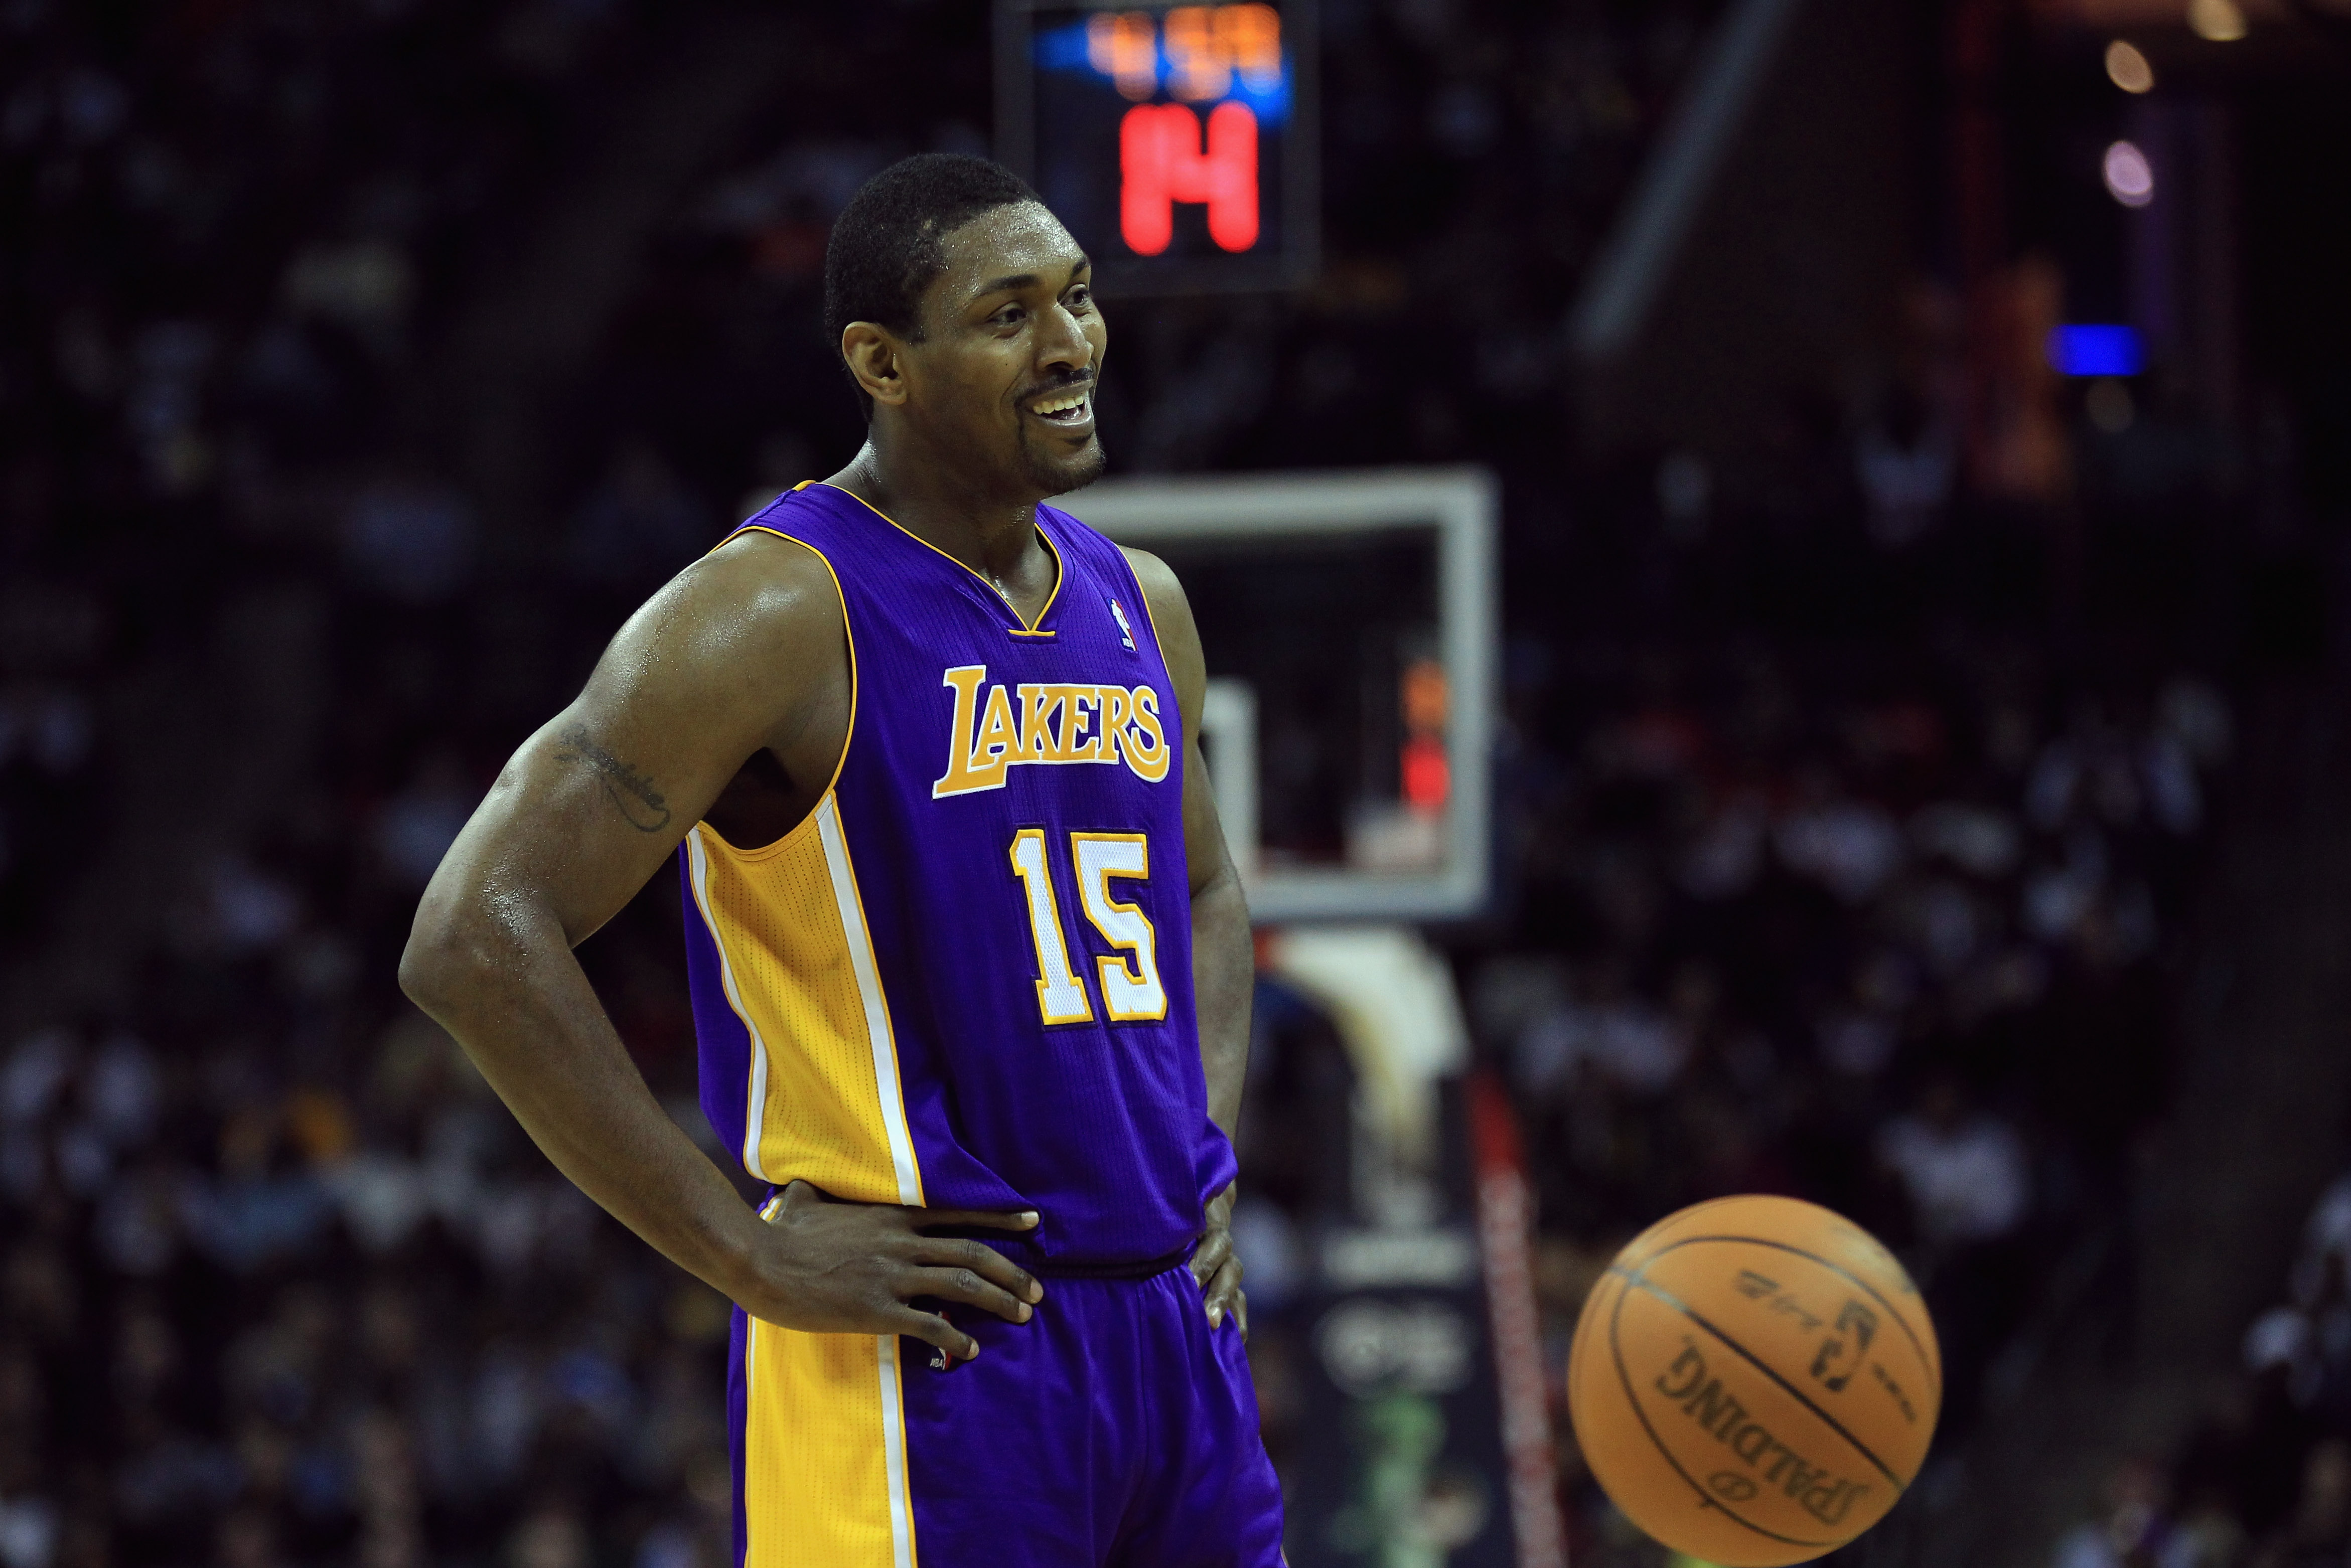 CHARLOTTE, NC - FEBRUARY 14:  Ron Artest #15 of the Los Angeles Lakers against the Charlotte Bobcats during their game at Time Warner Cable Arena on February 14, 2011 in Charlotte, North Carolina. NOTE TO USER: User expressly acknowledges and agrees that,